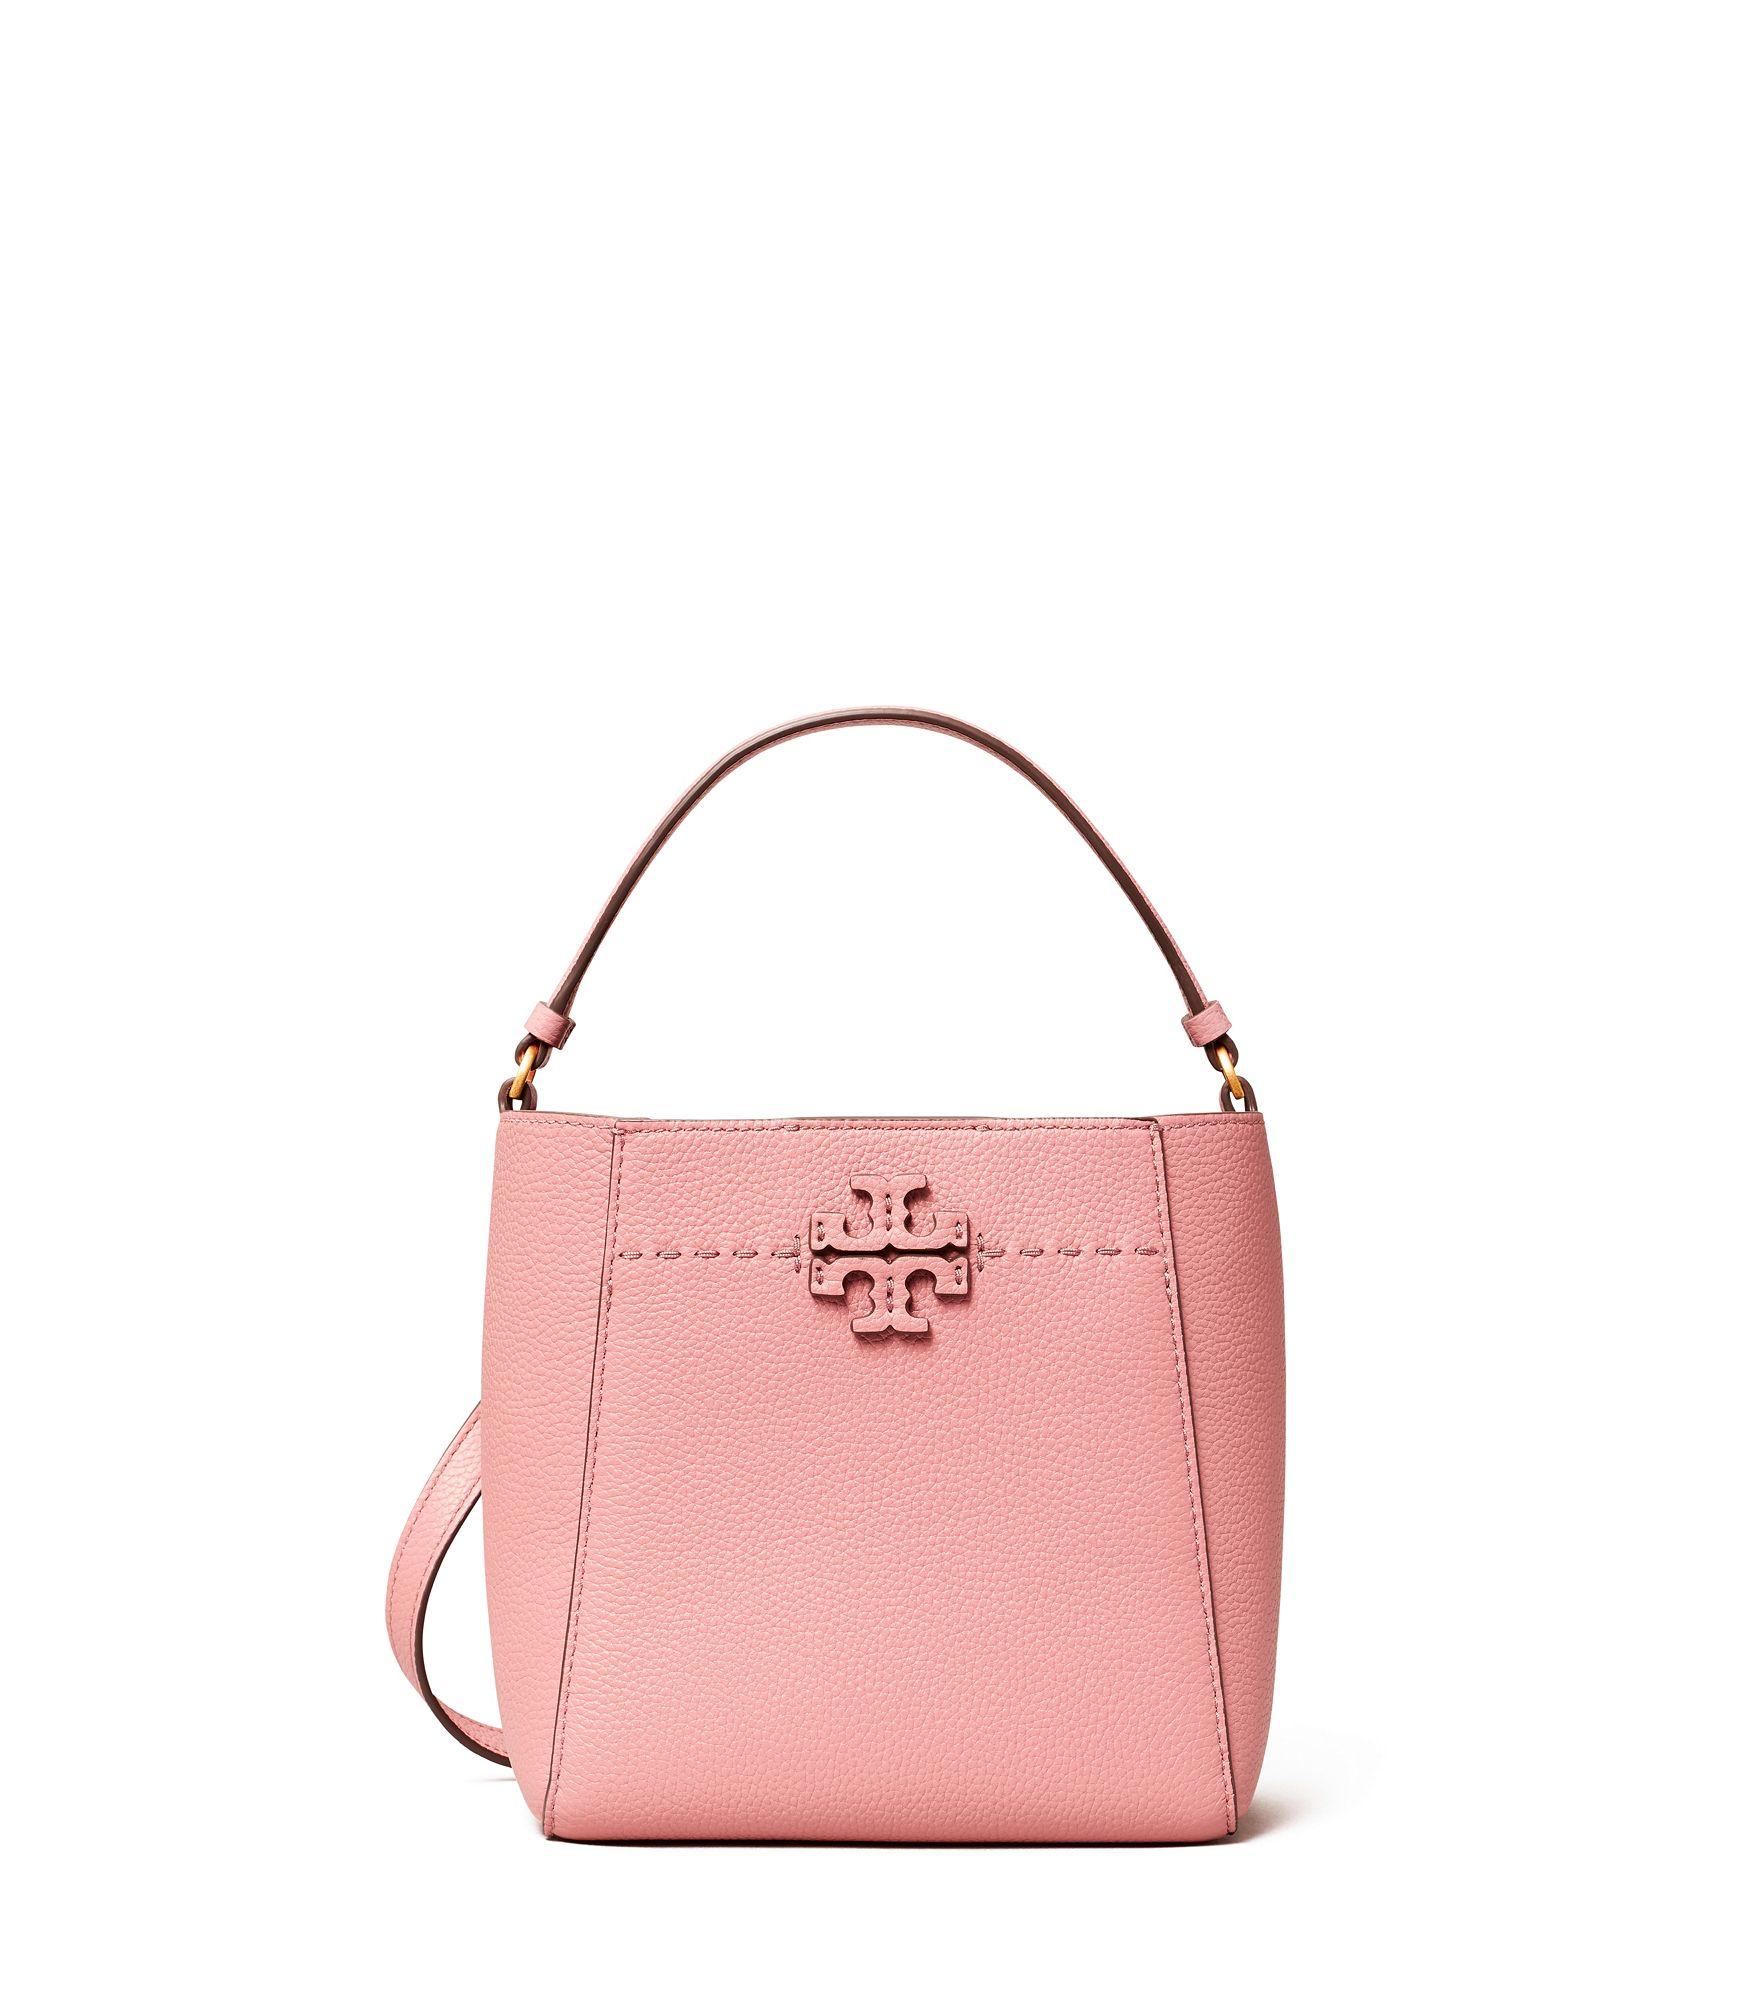 Tory Burch Mcgraw Small Bucket Bag in Pink | Lyst